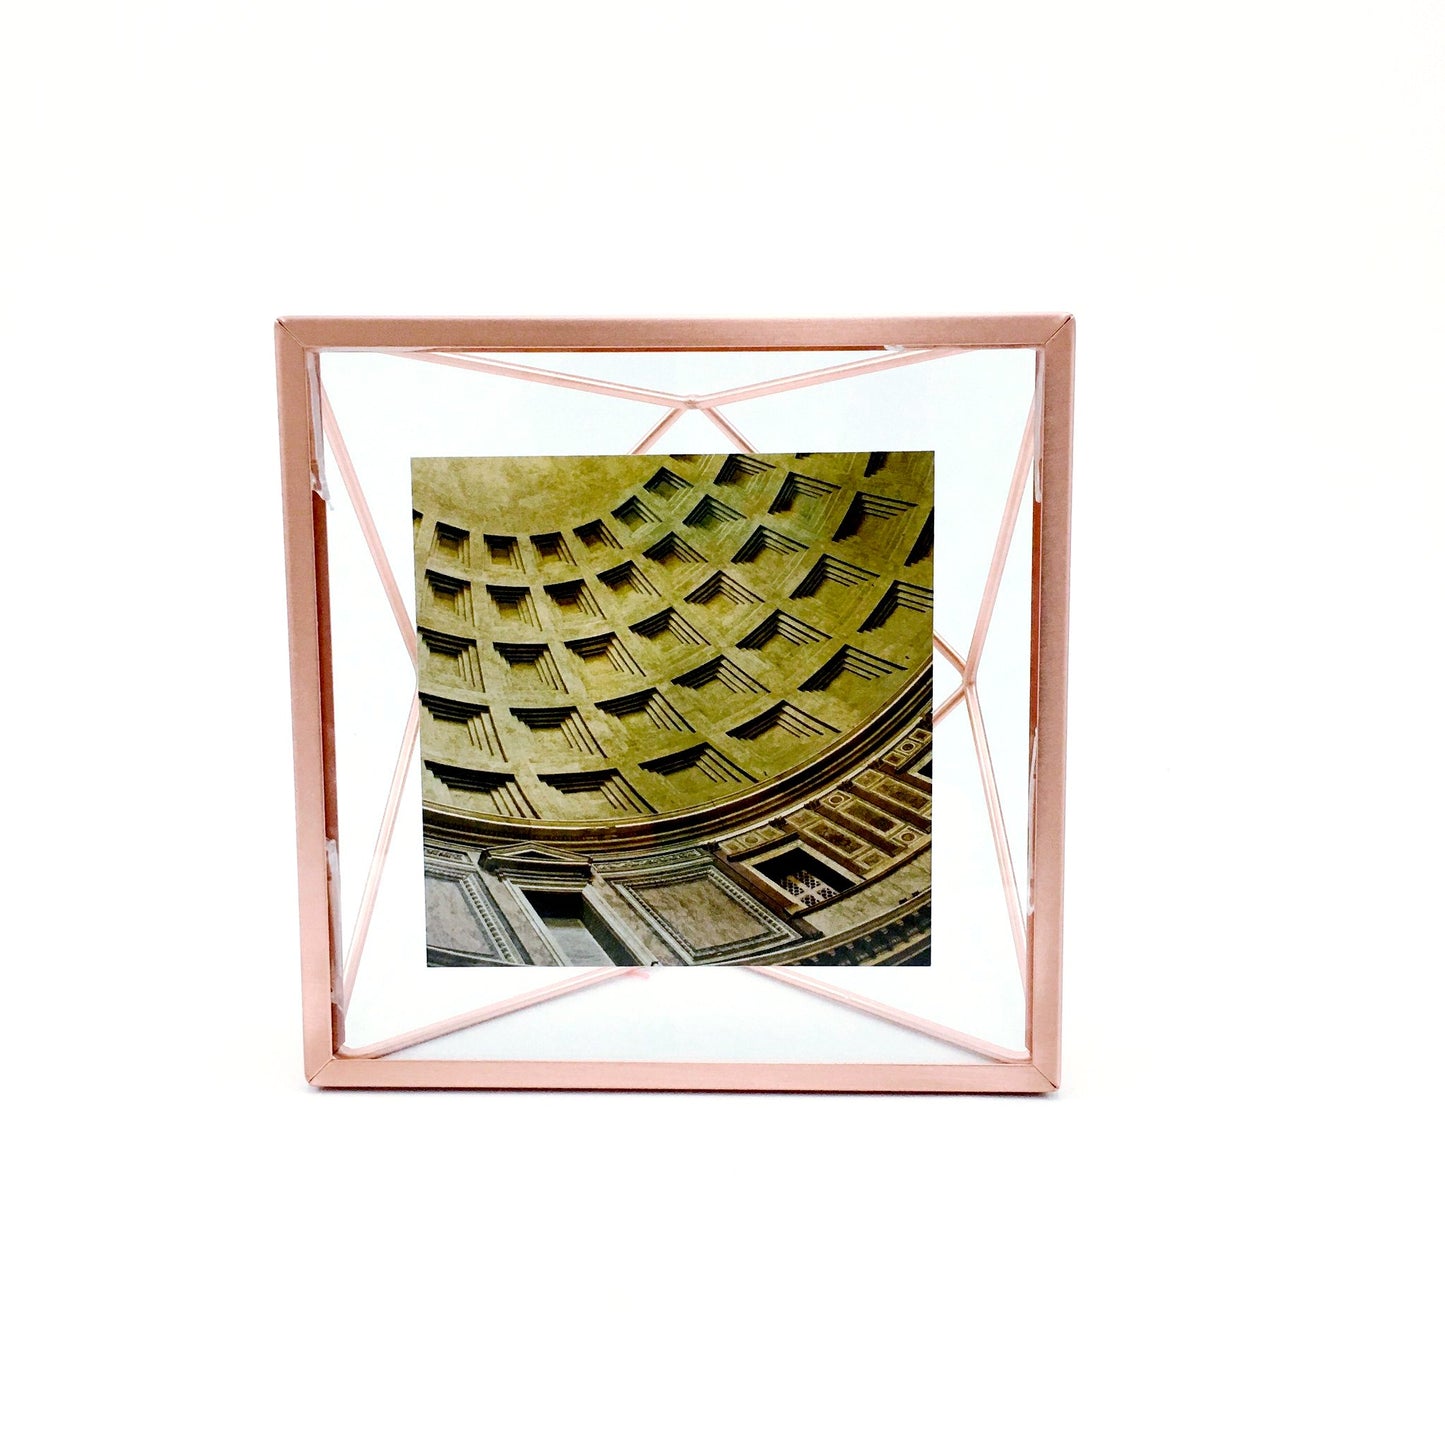 "Prisma" Picture Frames in Copper by Umbra - 4 x 4 inches by Umbra - K. A. Artist Shop